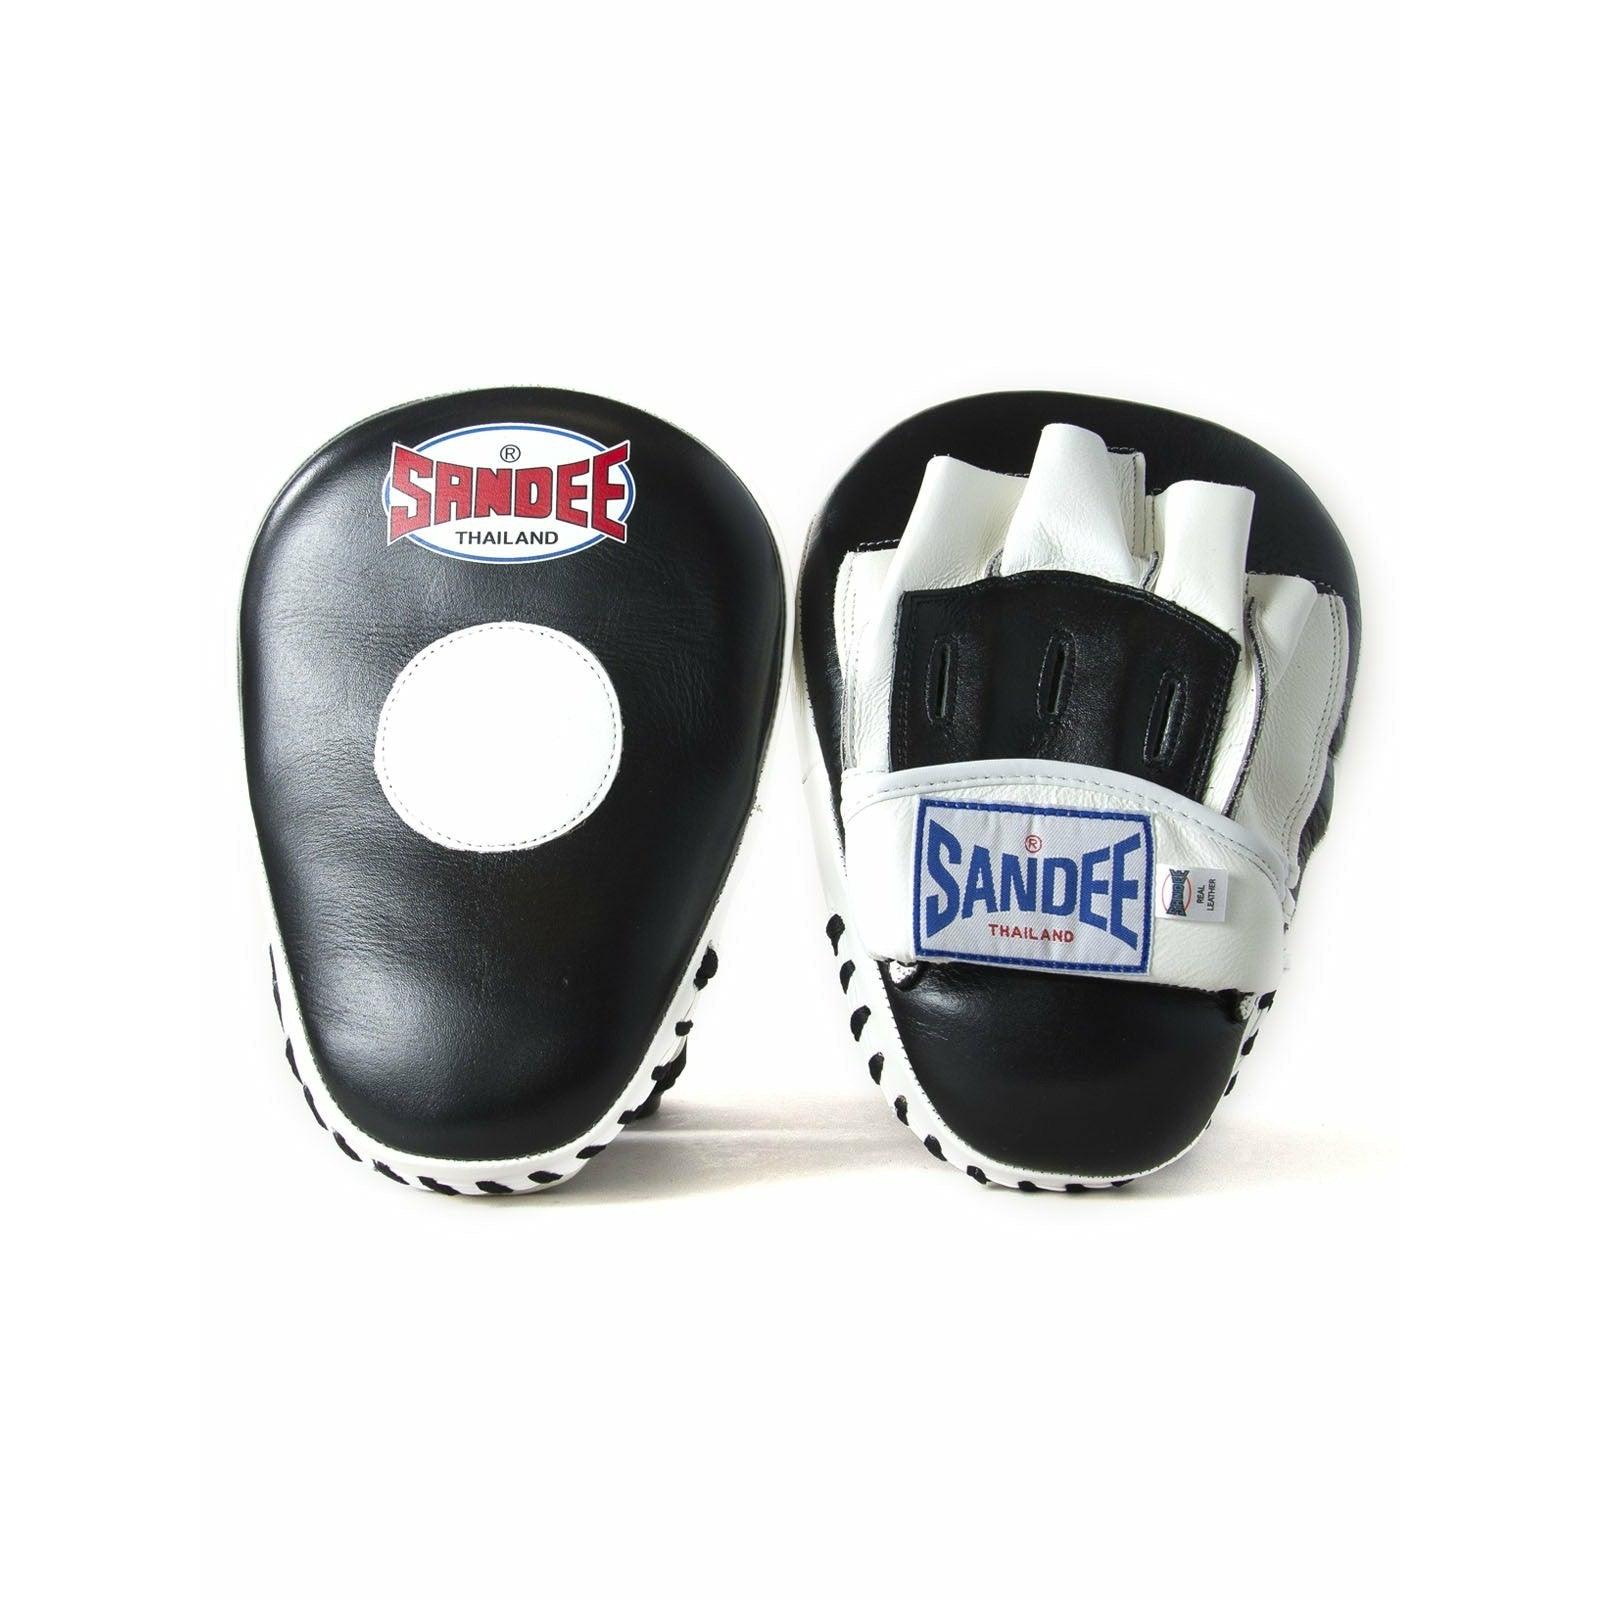 Sandee Curved Focus Mitts - Black & White - Muay Thailand